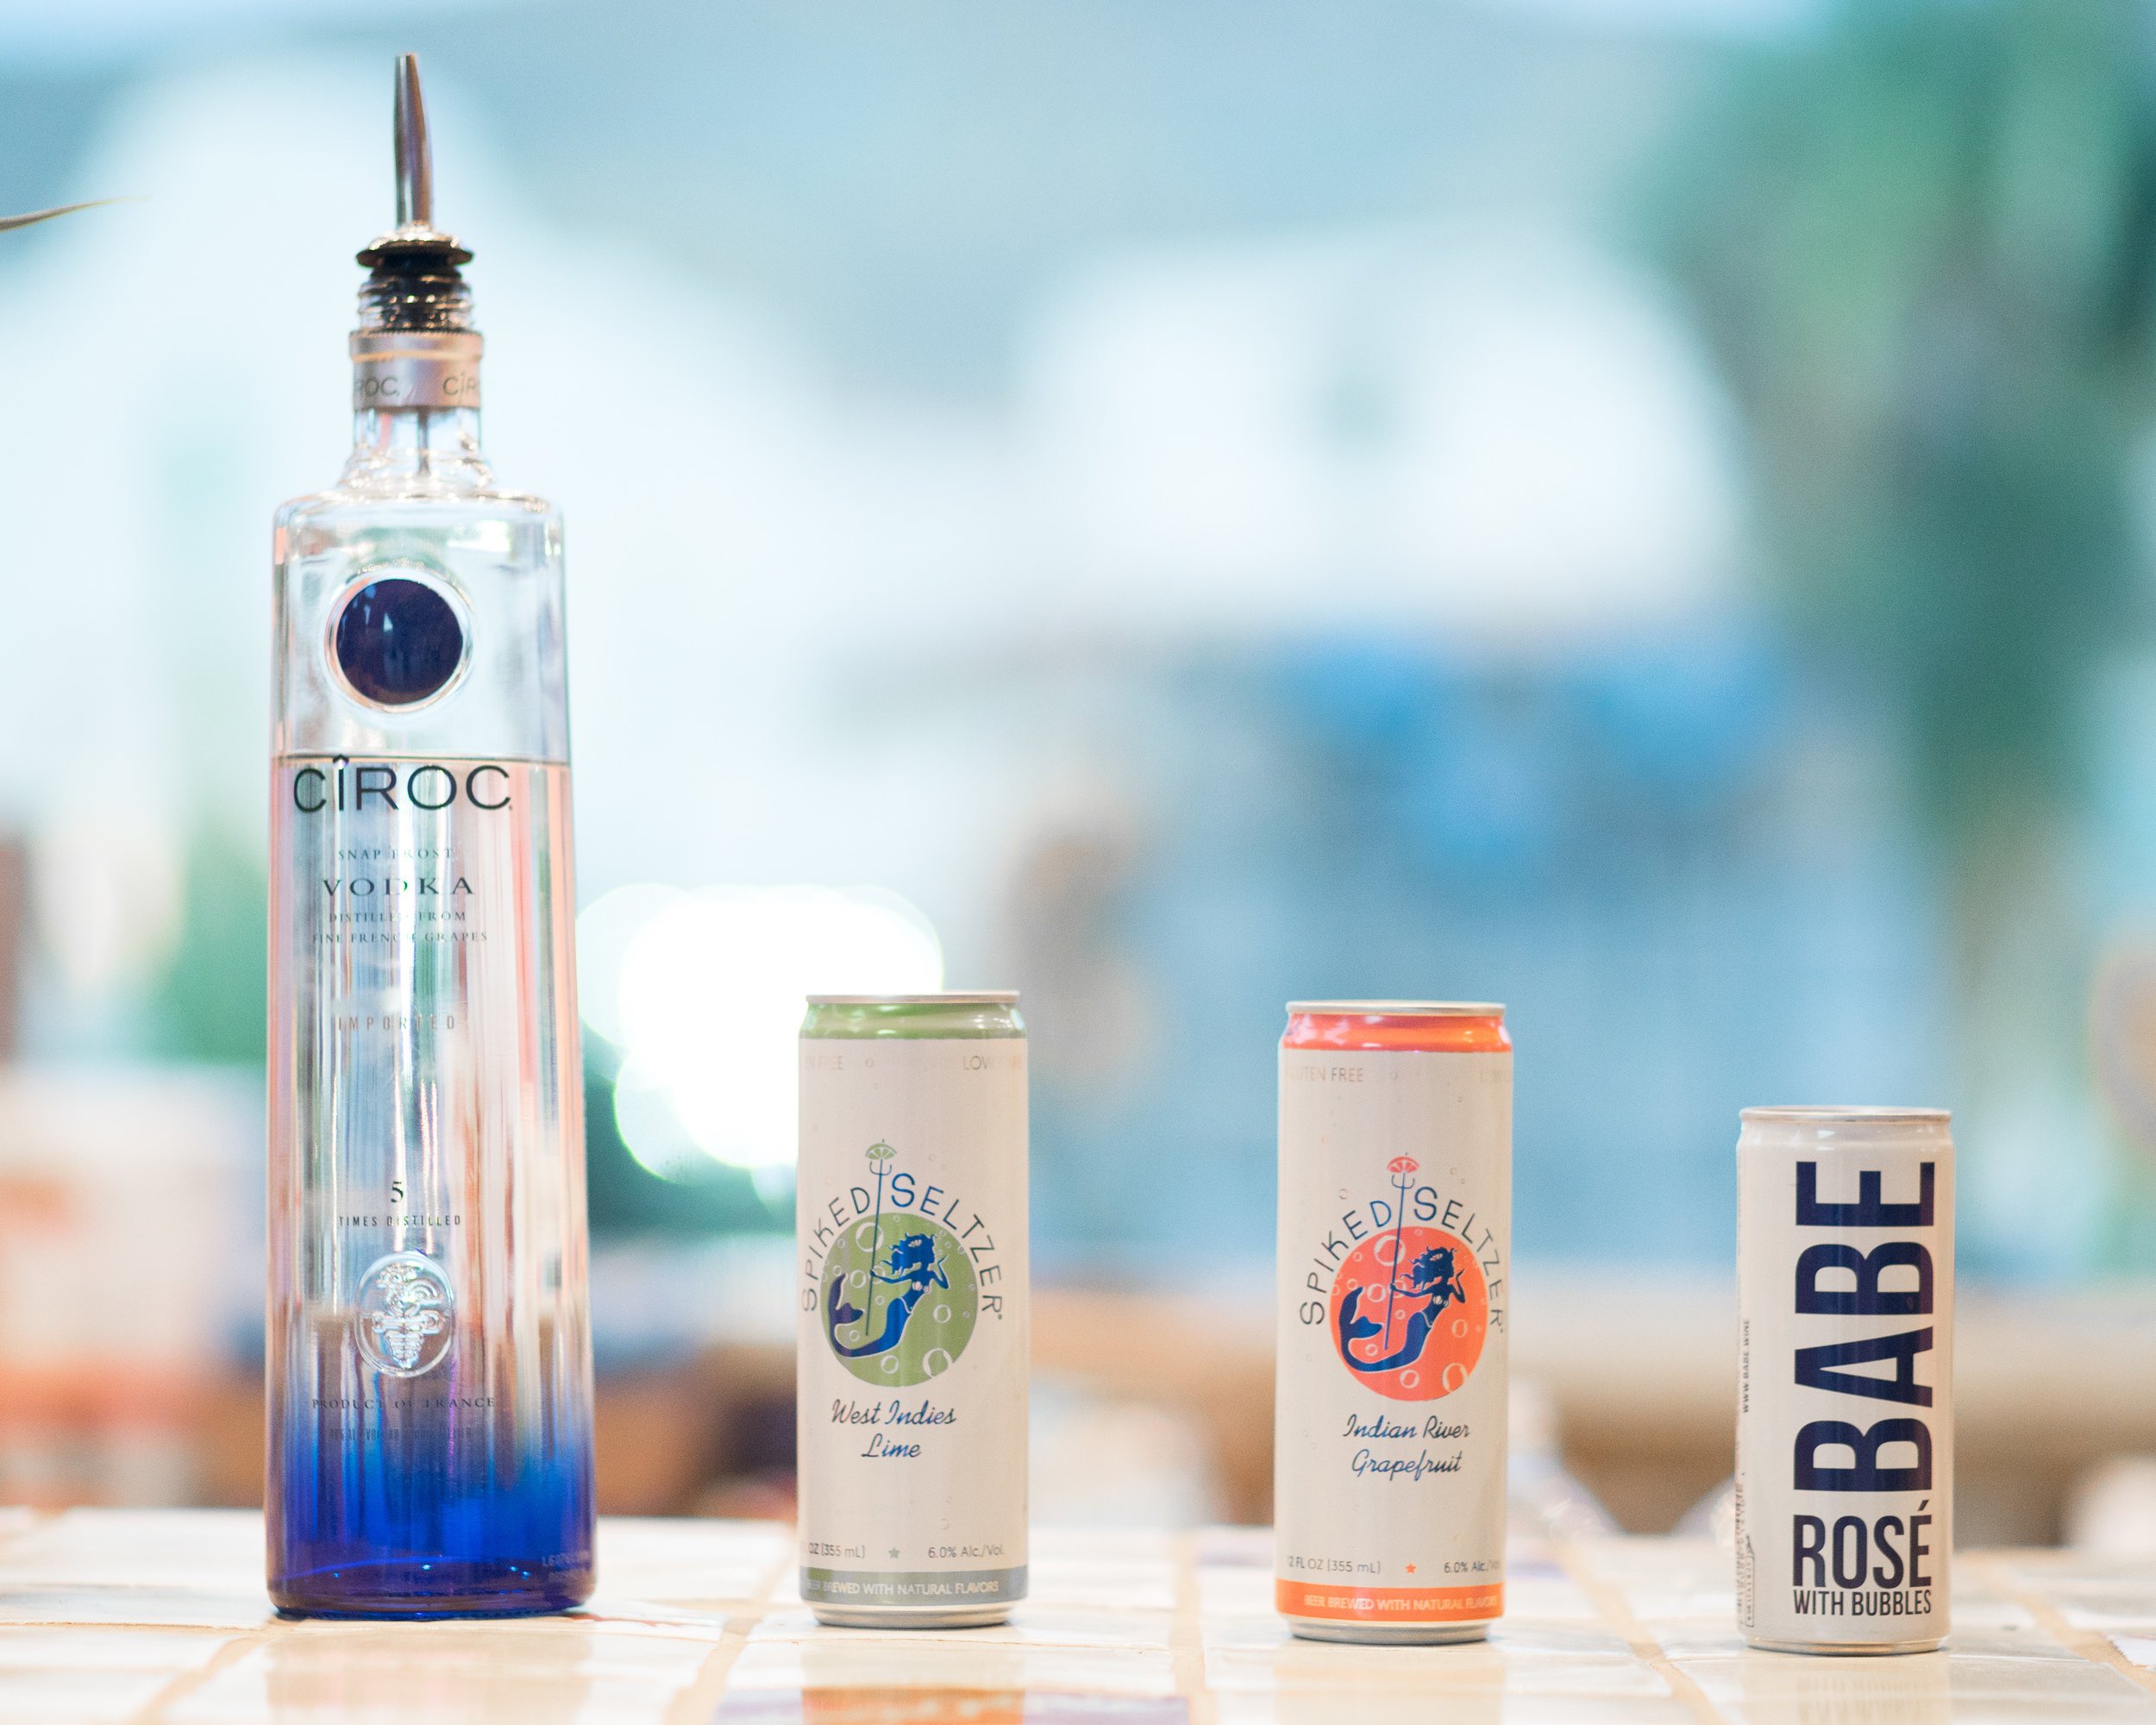 Ultimate Hollywood Coachella Poolside Party ciroc spiked seltzer rose babe.jpg